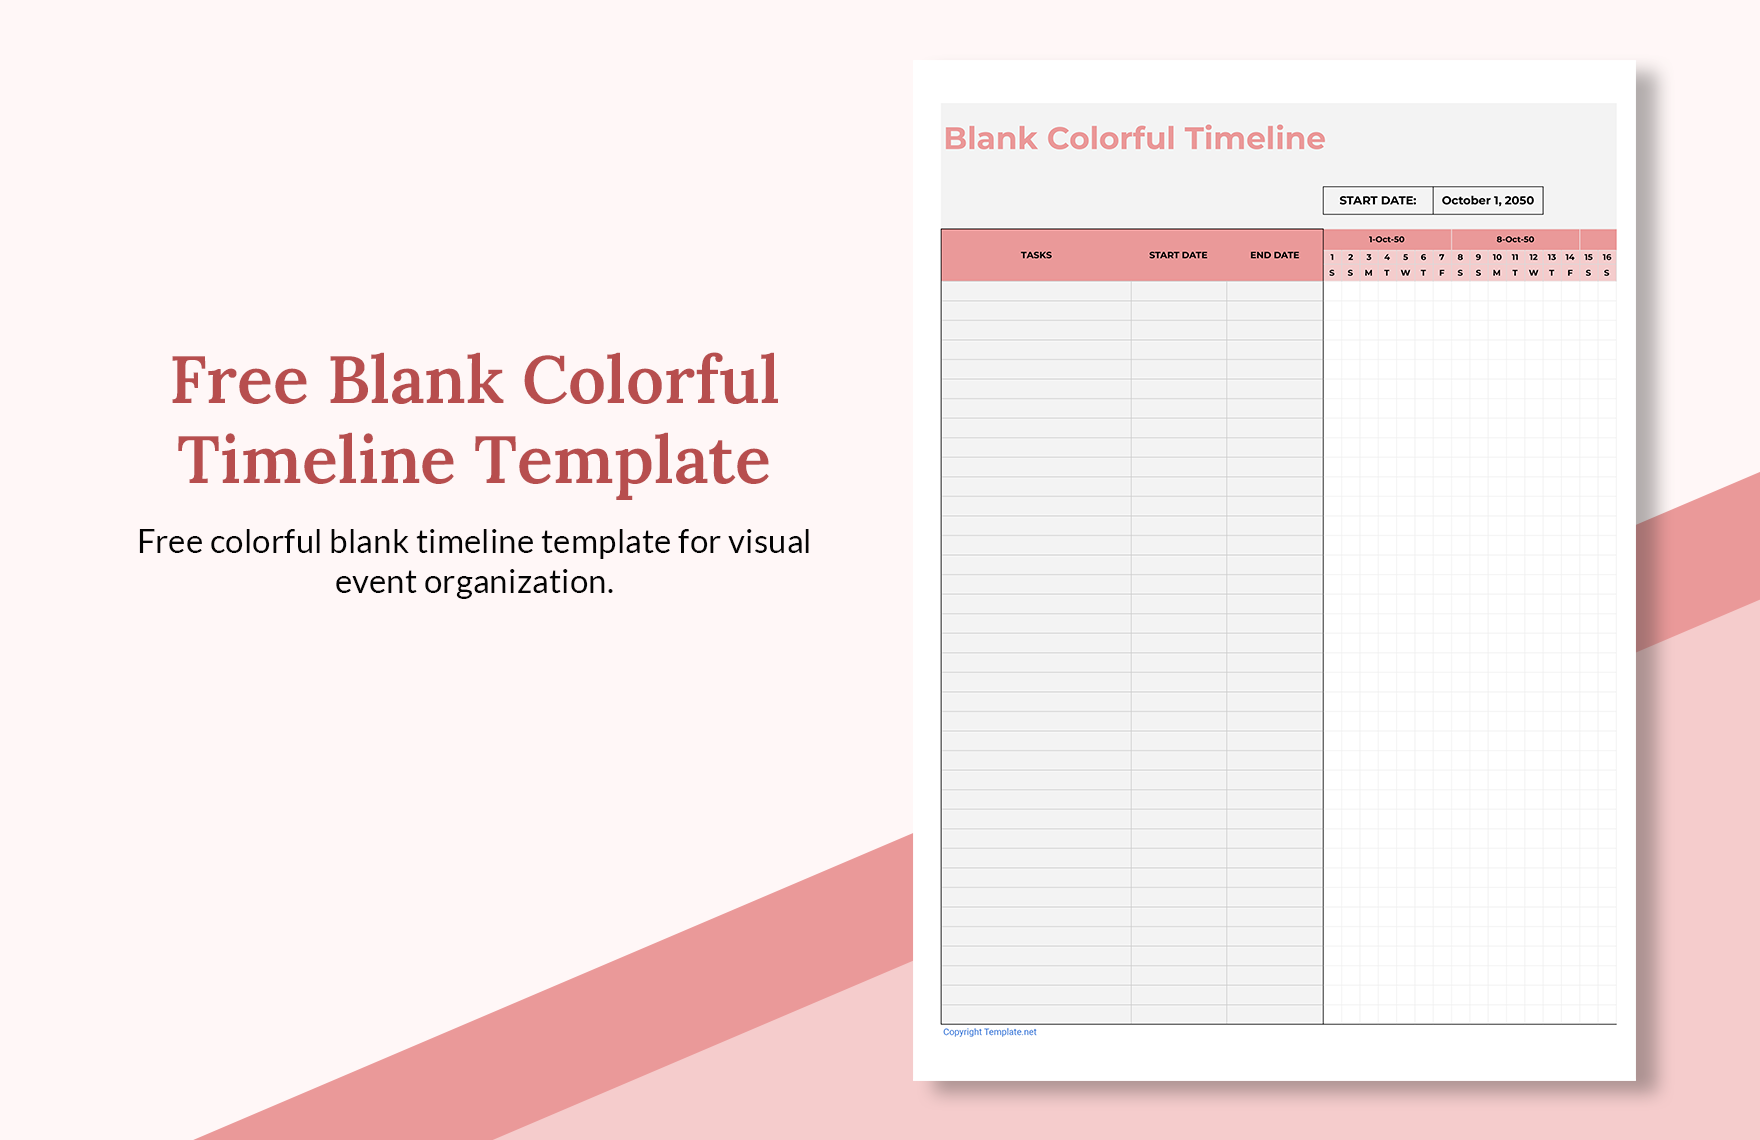 Free Blank Timeline Template Download in Excel, Google Sheets